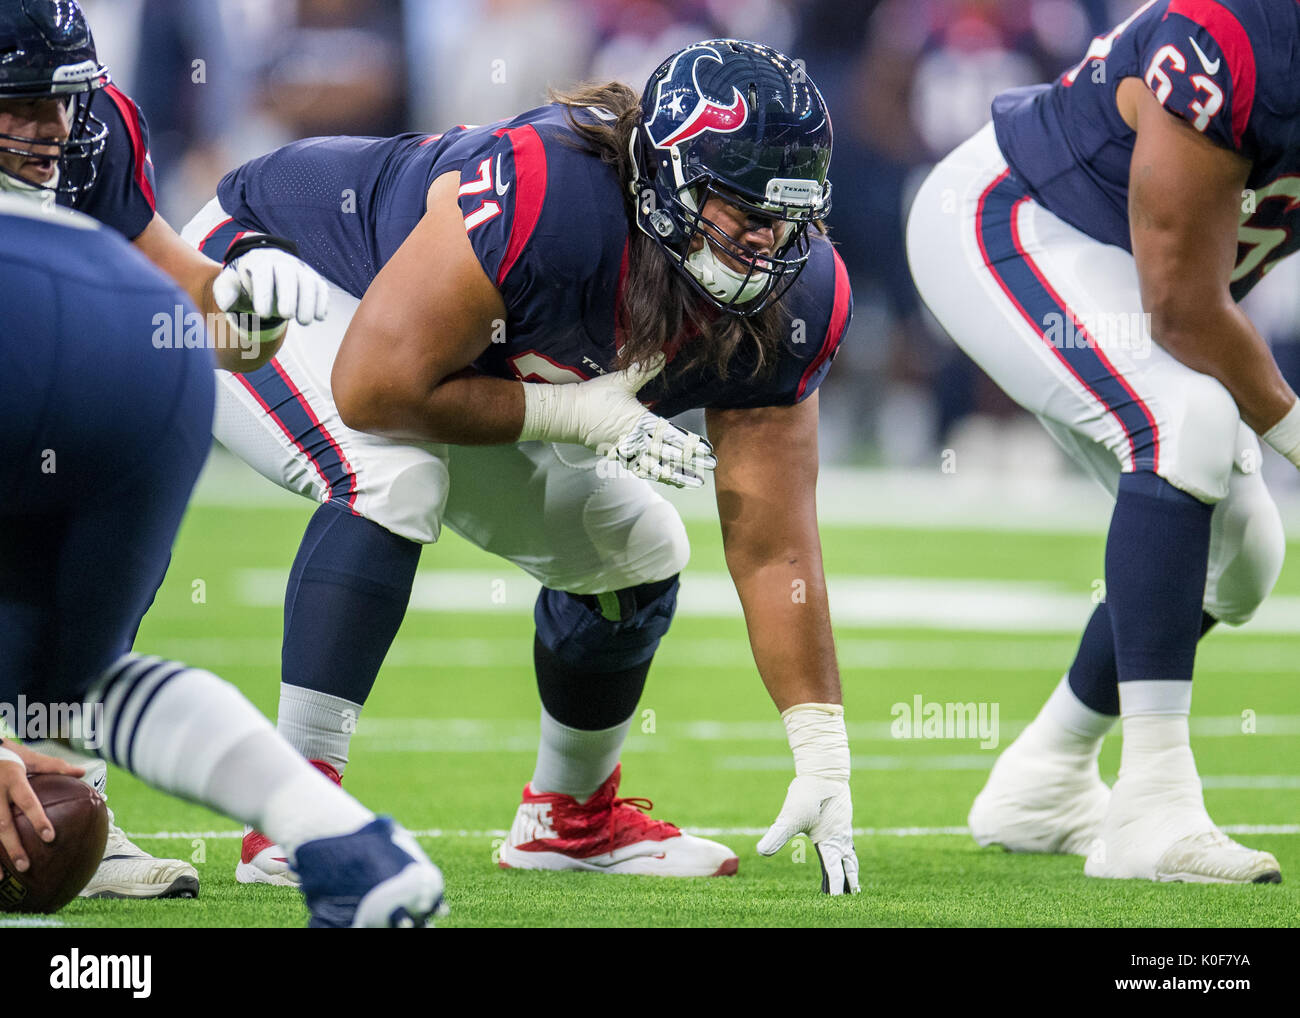 August 19, 2017: Houston Texans guard Xavier Su'a-Filo (71) prepares for a play during the 1st quarter of an NFL football pre-season game between the Houston Texans and the New England Patriots at NRG Stadium in Houston, TX. The Texans won the game 27-23...Trask Smith/CSM Stock Photo